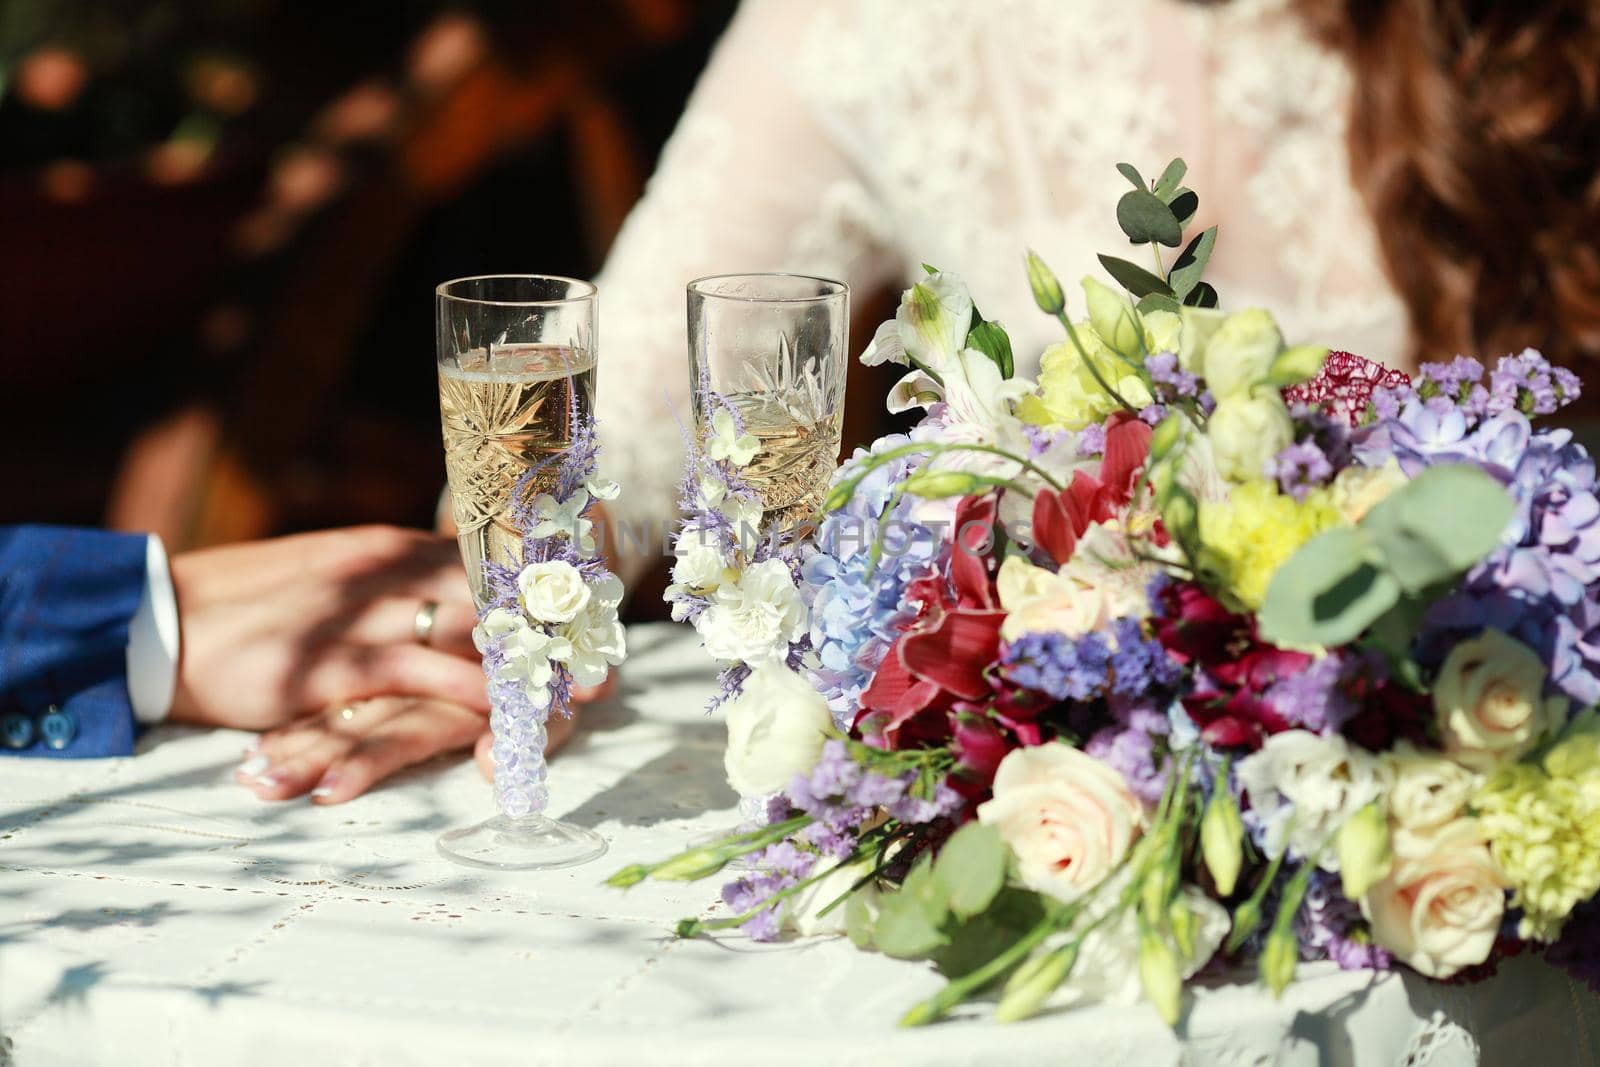 Wedding decoration in the style of boho, floral arrangement, decorated table in the garden. Against the background of the bride and groom embracing.